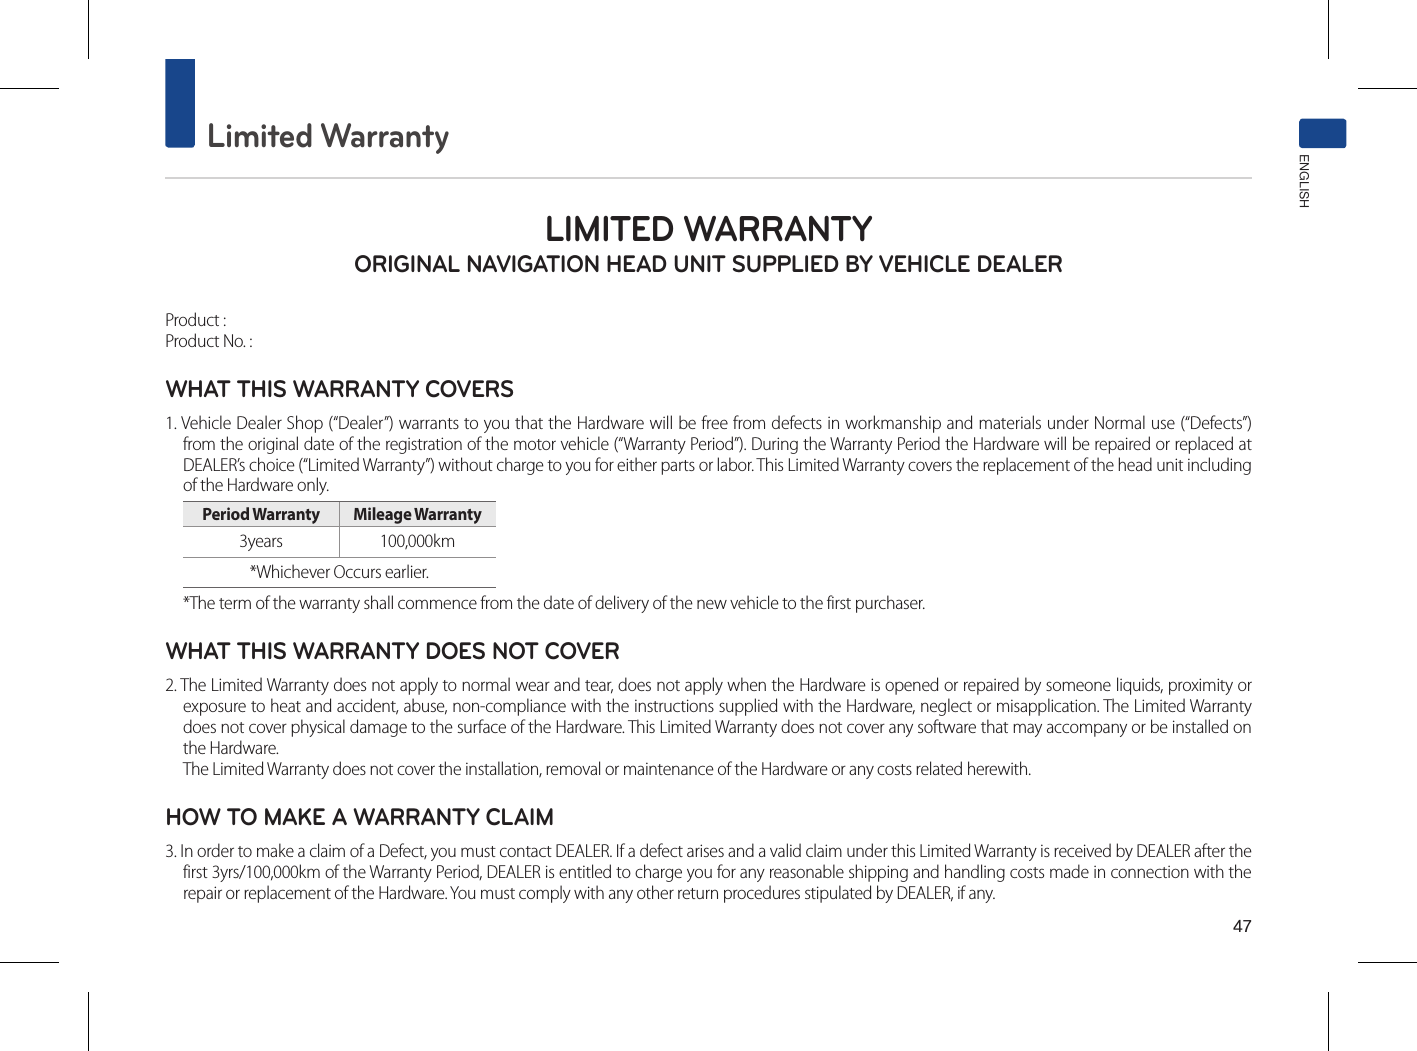 47Limited WarrantyENGLISHLIMITED WARRANTY ORIGINAL NAVIGATION HEAD UNIT SUPPLIED BY VEHICLE DEALER Product : Product No. : WHAT THIS WARRANTY COVERS 1. Vehicle Dealer Shop (“Dealer”) warrants to you that the Hardware will be free from defects in workmanship and materials under Normal use (“Defects”) from the original date of the registration of the motor vehicle (“Warranty Period”). During the Warranty Period the Hardware will be repaired or replaced at DEALER’s choice (“Limited Warranty”) without charge to you for either parts or labor. This Limited Warranty covers the replacement of the head unit including of the Hardware only. Period Warranty  Mileage Warranty 3years  100,000km *Whichever Occurs earlier.*The term of the warranty shall commence from the date of delivery of the new vehicle to the first purchaser.WHAT THIS WARRANTY DOES NOT COVER 2. The Limited Warranty does not apply to normal wear and tear, does not apply when the Hardware is opened or repaired by someone liquids, proximity or exposure to heat and accident, abuse, non-compliance with the instructions supplied with the Hardware, neglect or misapplication. The Limited Warranty does not cover physical damage to the surface of the Hardware. This Limited Warranty does not cover any software that may accompany or be installed on the Hardware. The Limited Warranty does not cover the installation, removal or maintenance of the Hardware or any costs related herewith.HOW TO MAKE A WARRANTY CLAIM3. In order to make a claim of a Defect, you must contact DEALER. If a defect arises and a valid claim under this Limited Warranty is received by DEALER after the first 3yrs/100,000km of the Warranty Period, DEALER is entitled to charge you for any reasonable shipping and handling costs made in connection with the repair or replacement of the Hardware. You must comply with any other return procedures stipulated by DEALER, if any.